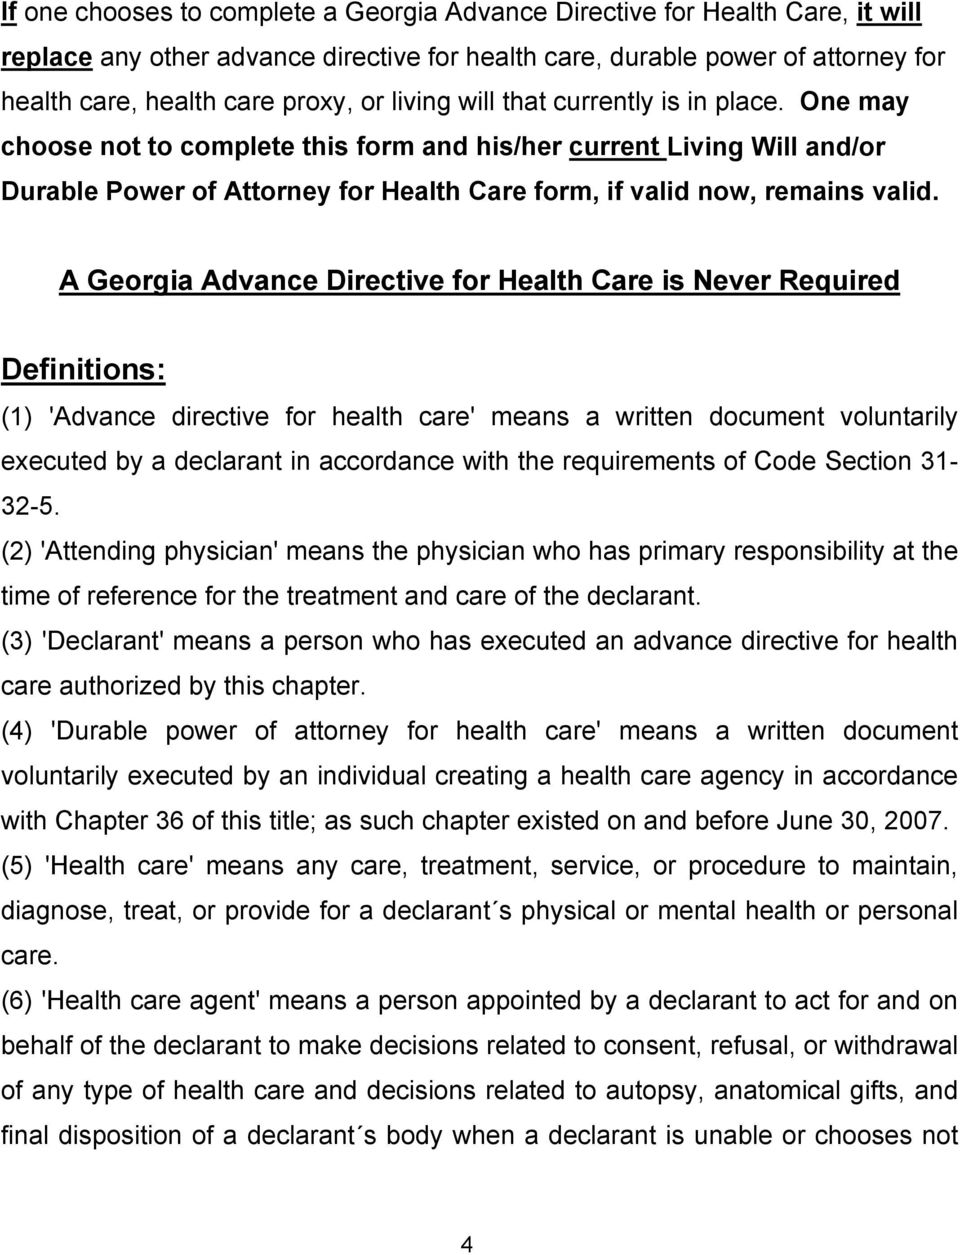 A Georgia Advance Directive for Health Care is Never Required Definitions: (1) 'Advance directive for health care' means a written document voluntarily executed by a declarant in accordance with the